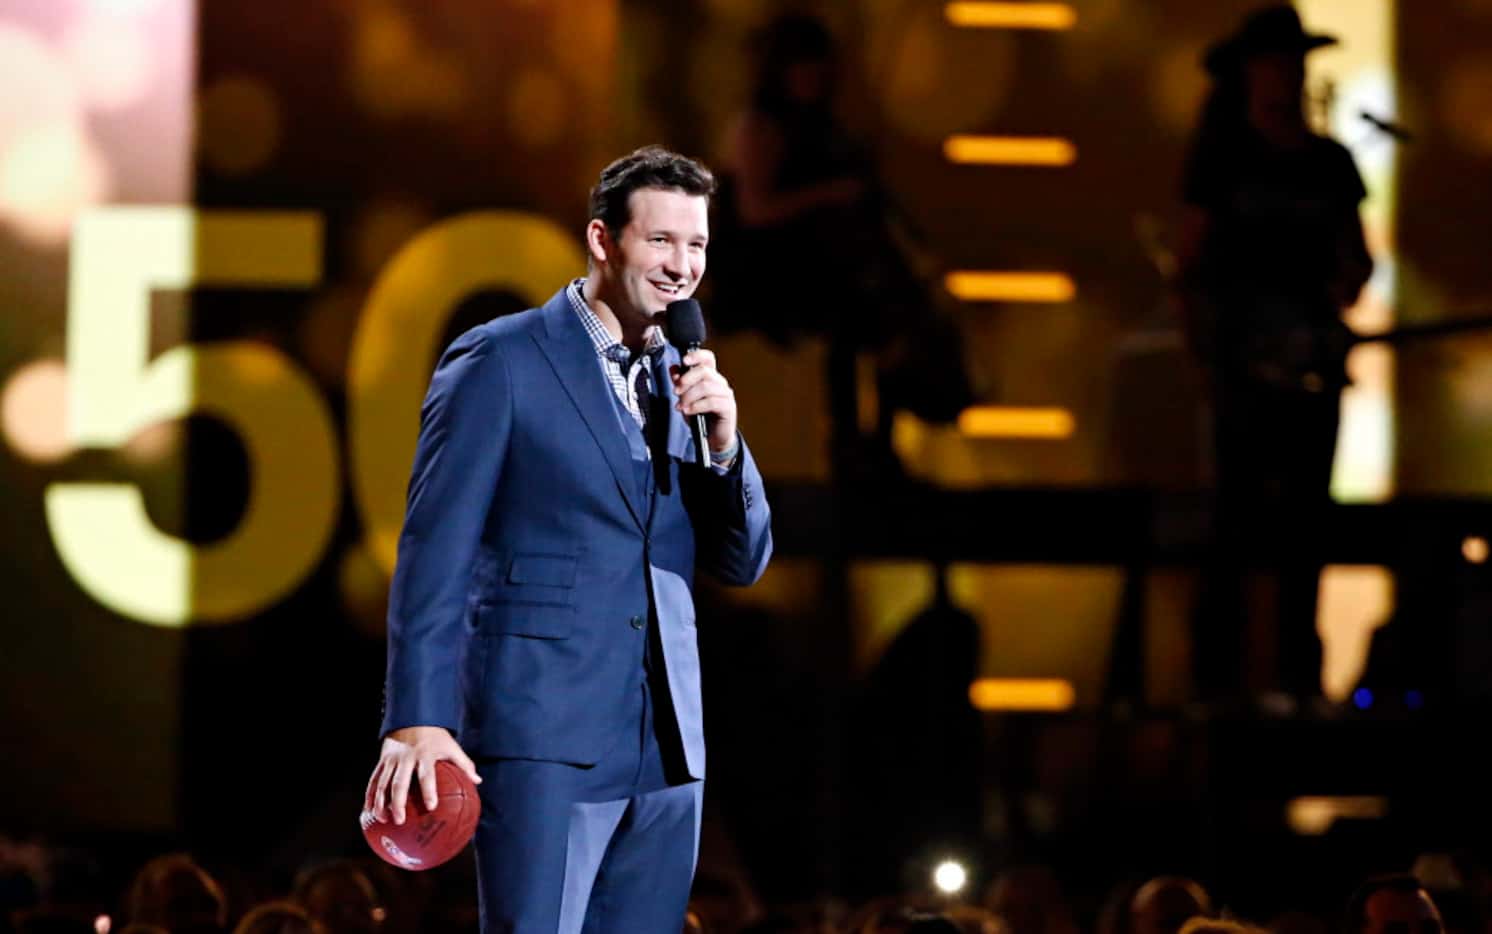 Dallas Cowboys quarterback Tony Romo stands on stage during the 2015 Academy of Country...